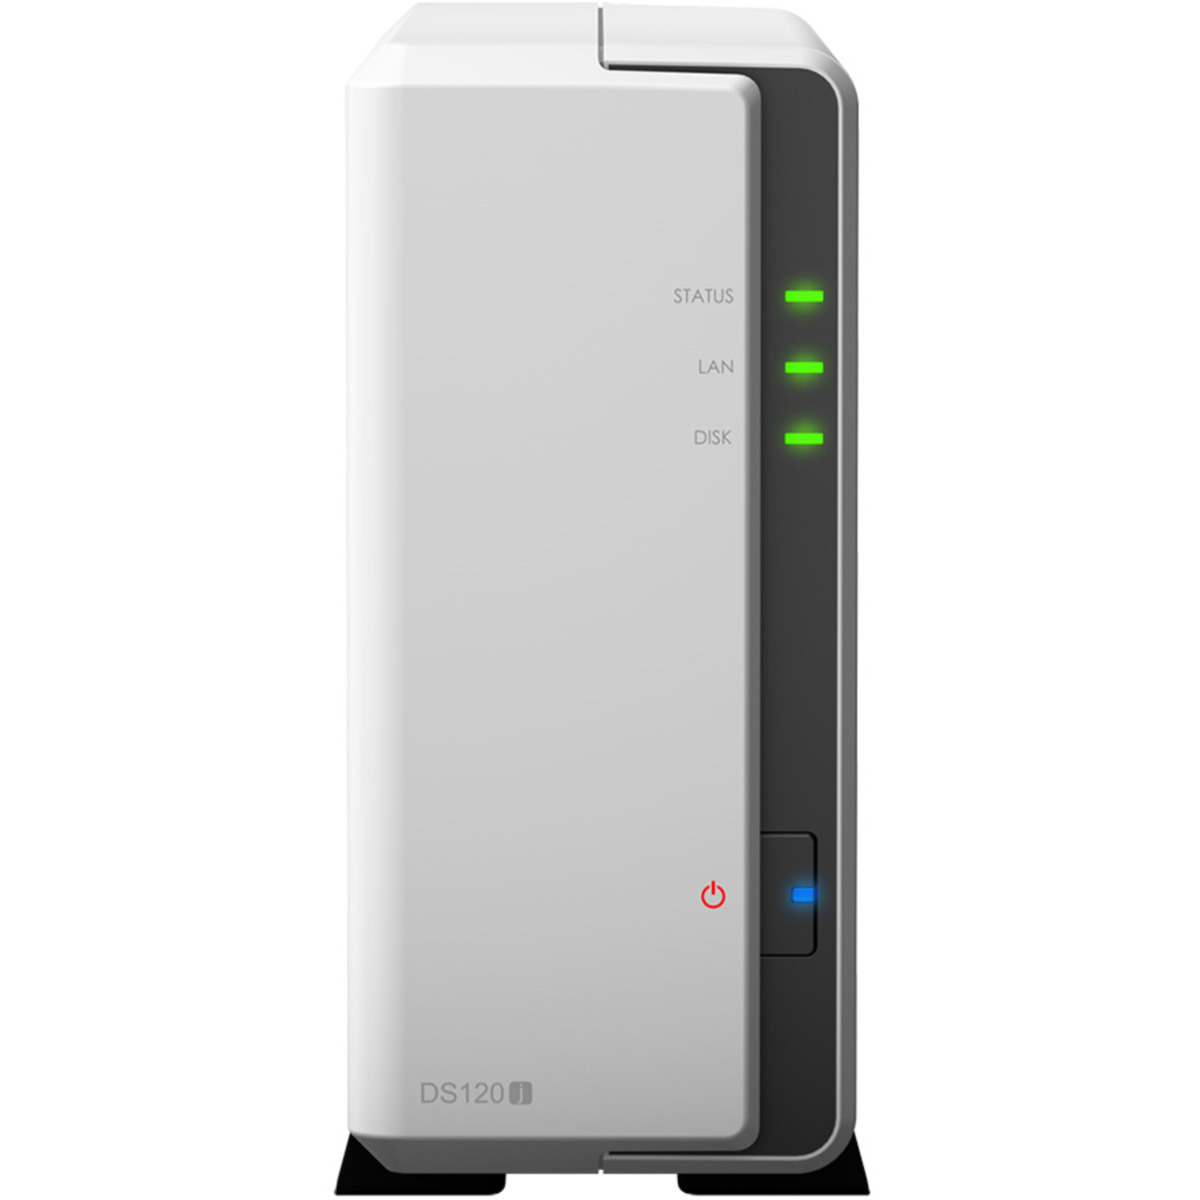 buy Synology DiskStation DS120j 2tb Desktop NAS - Network Attached Storage Device 1x2000gb Seagate BarraCuda ST2000DM008 3.5 7200rpm SATA 6Gb/s HDD CONSUMER Class Drives Installed - Burn-In Tested - nas headquarters buy network attached storage server device das new raid-5 free shipping simply usa DiskStation DS120j